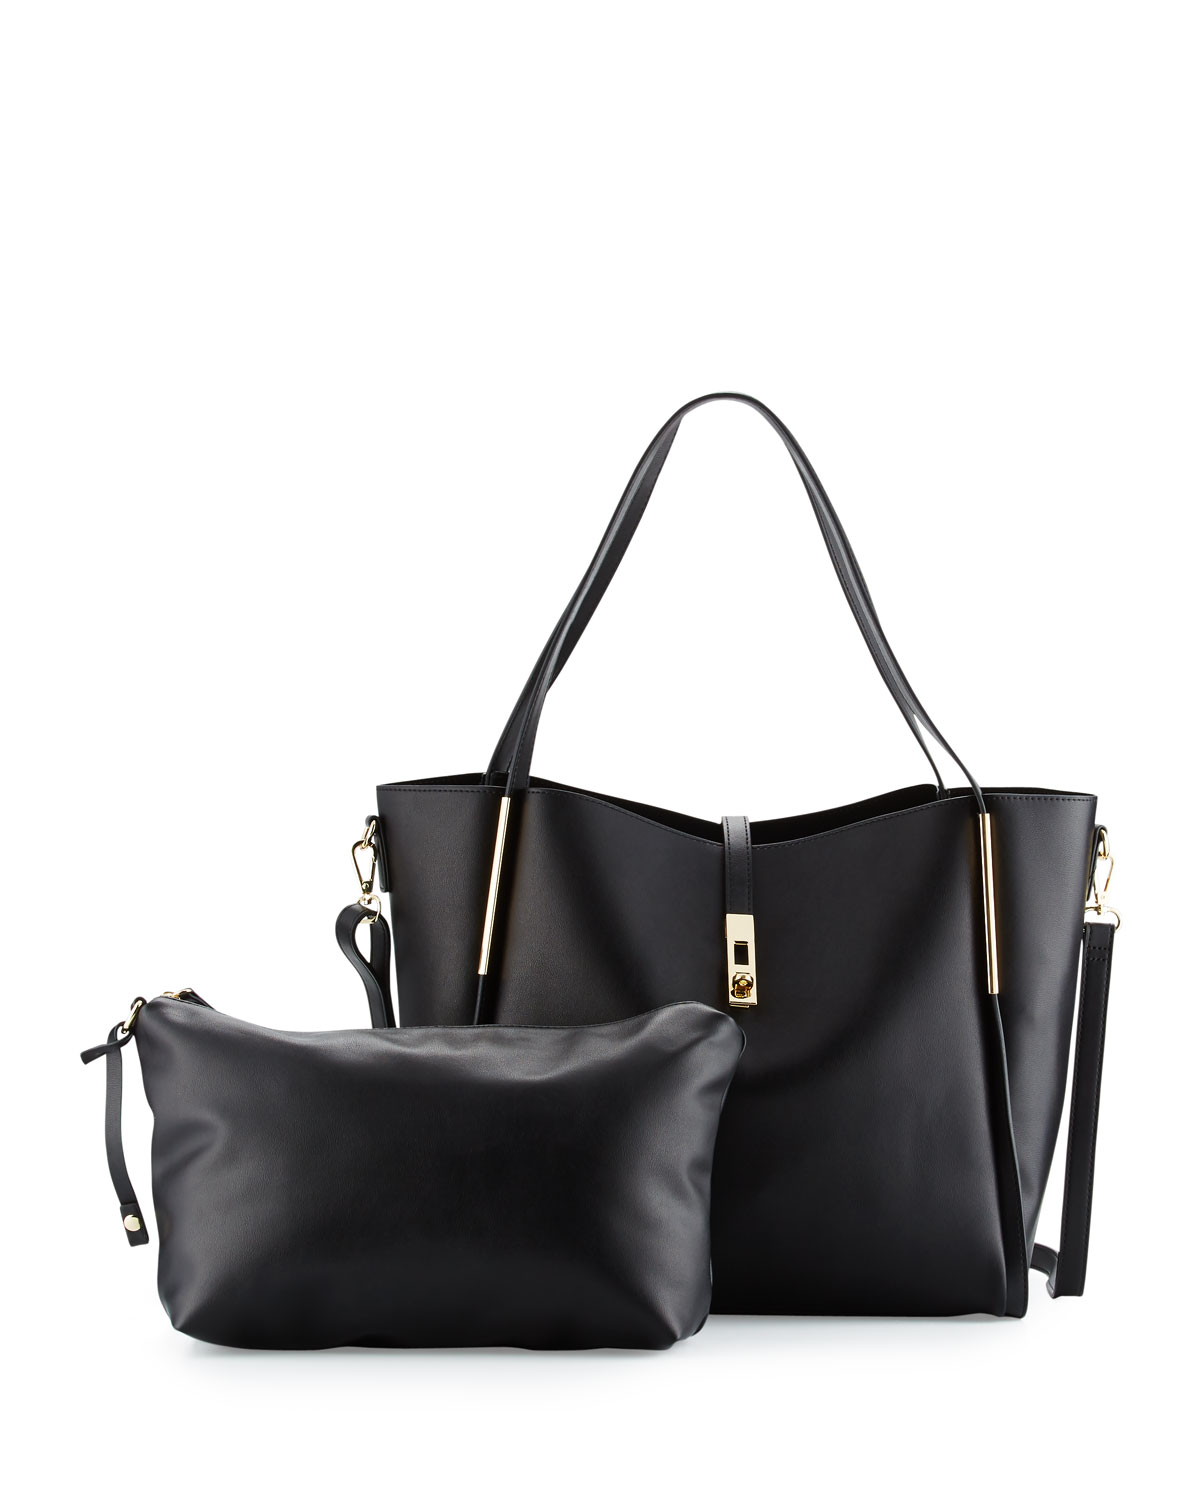 Neiman Marcus Abigail Faux-leather Tote Bag in Black - Lyst